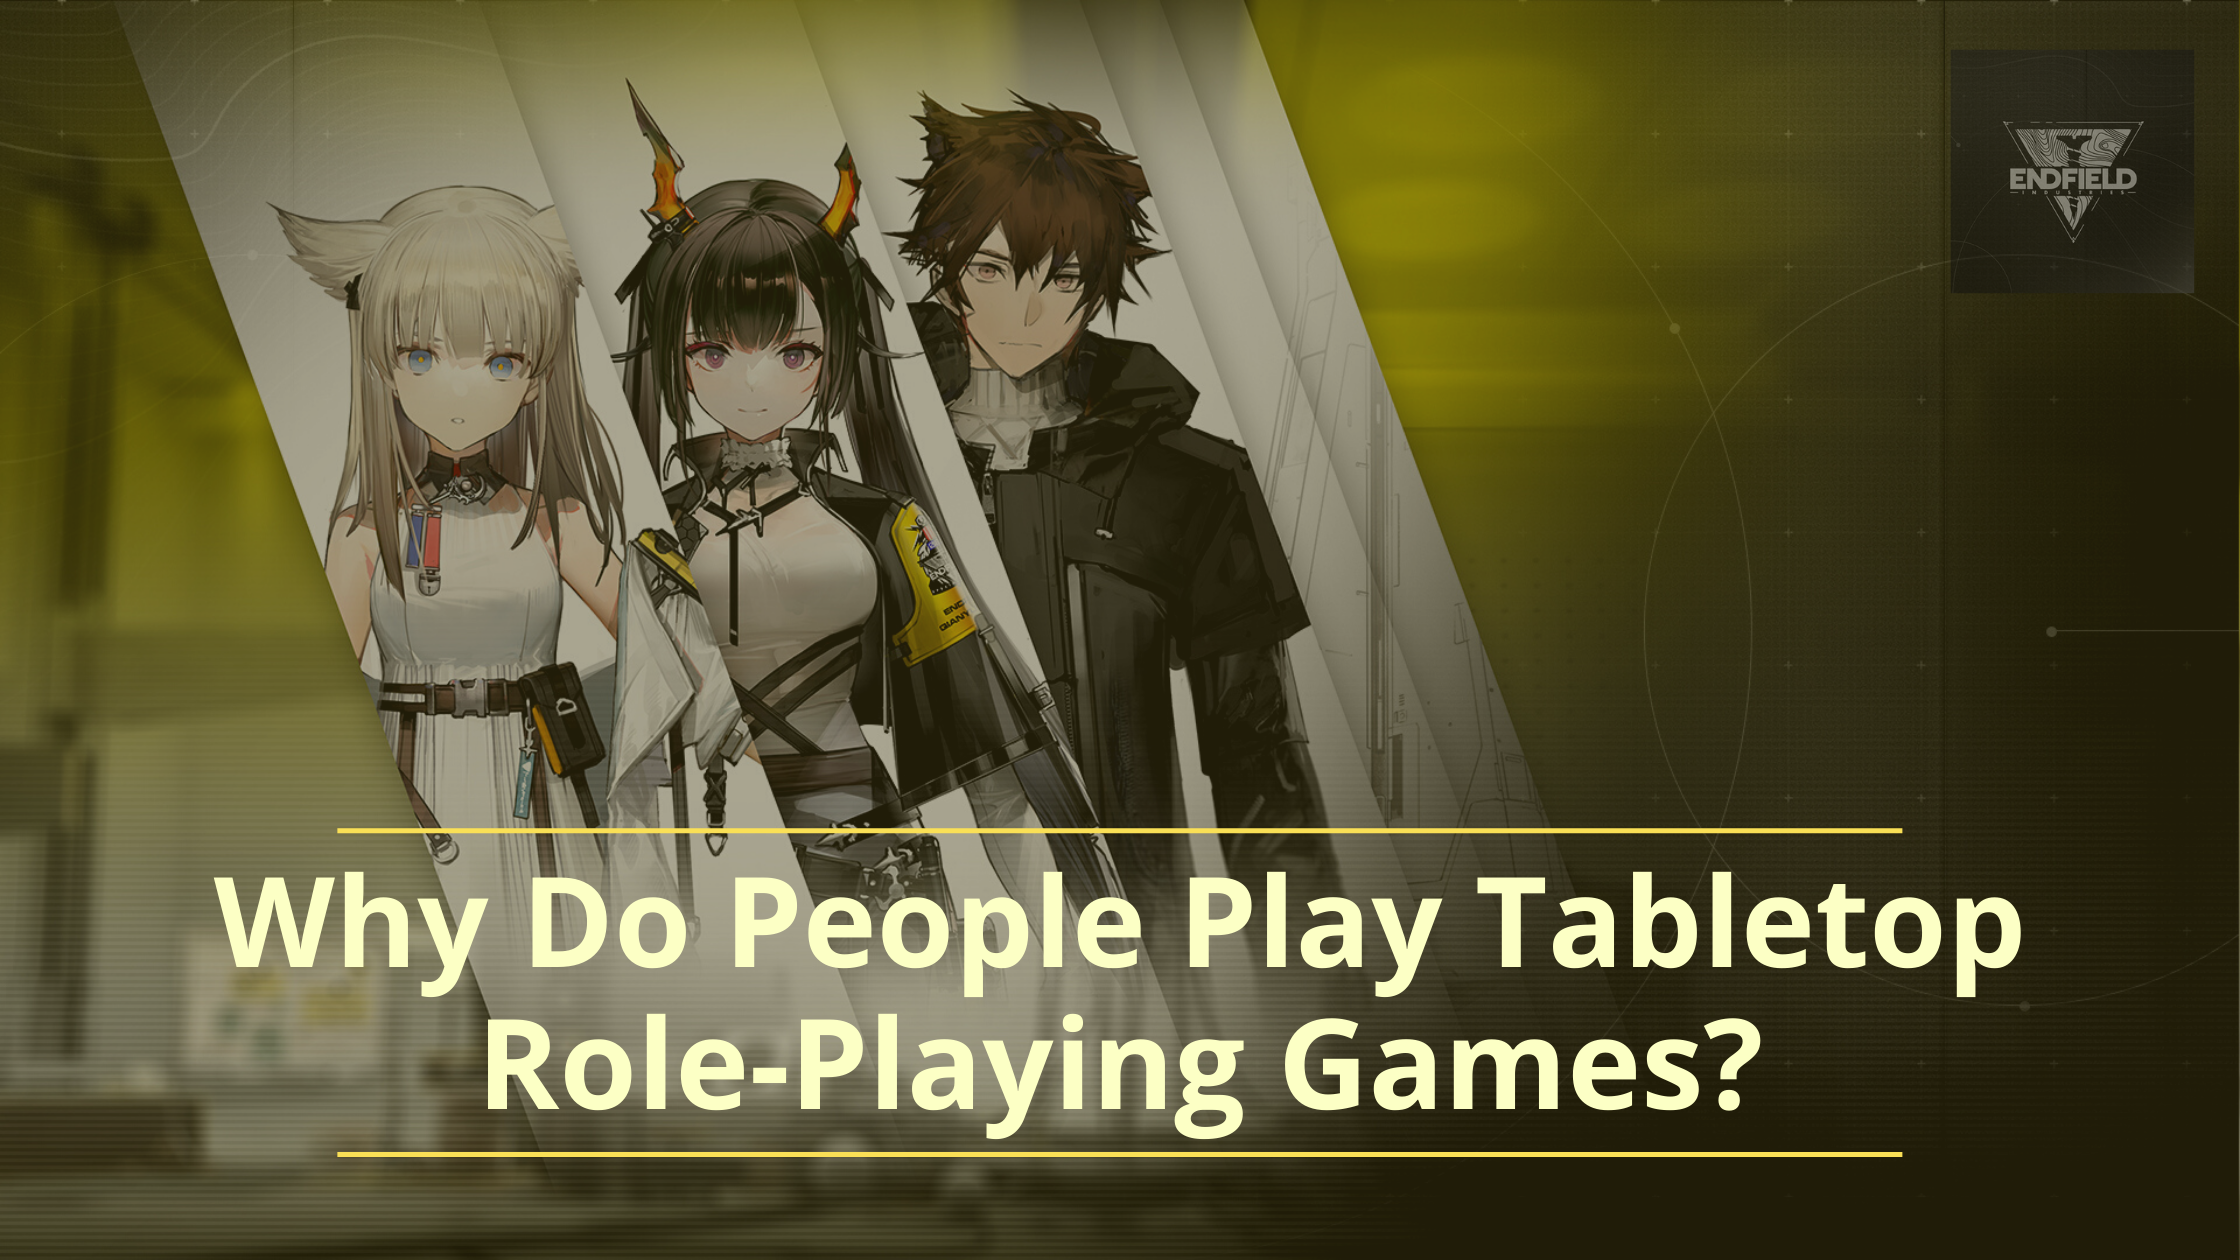 Why Do People Play Tabletop Role-Playing Games?: endfielko — LiveJournal